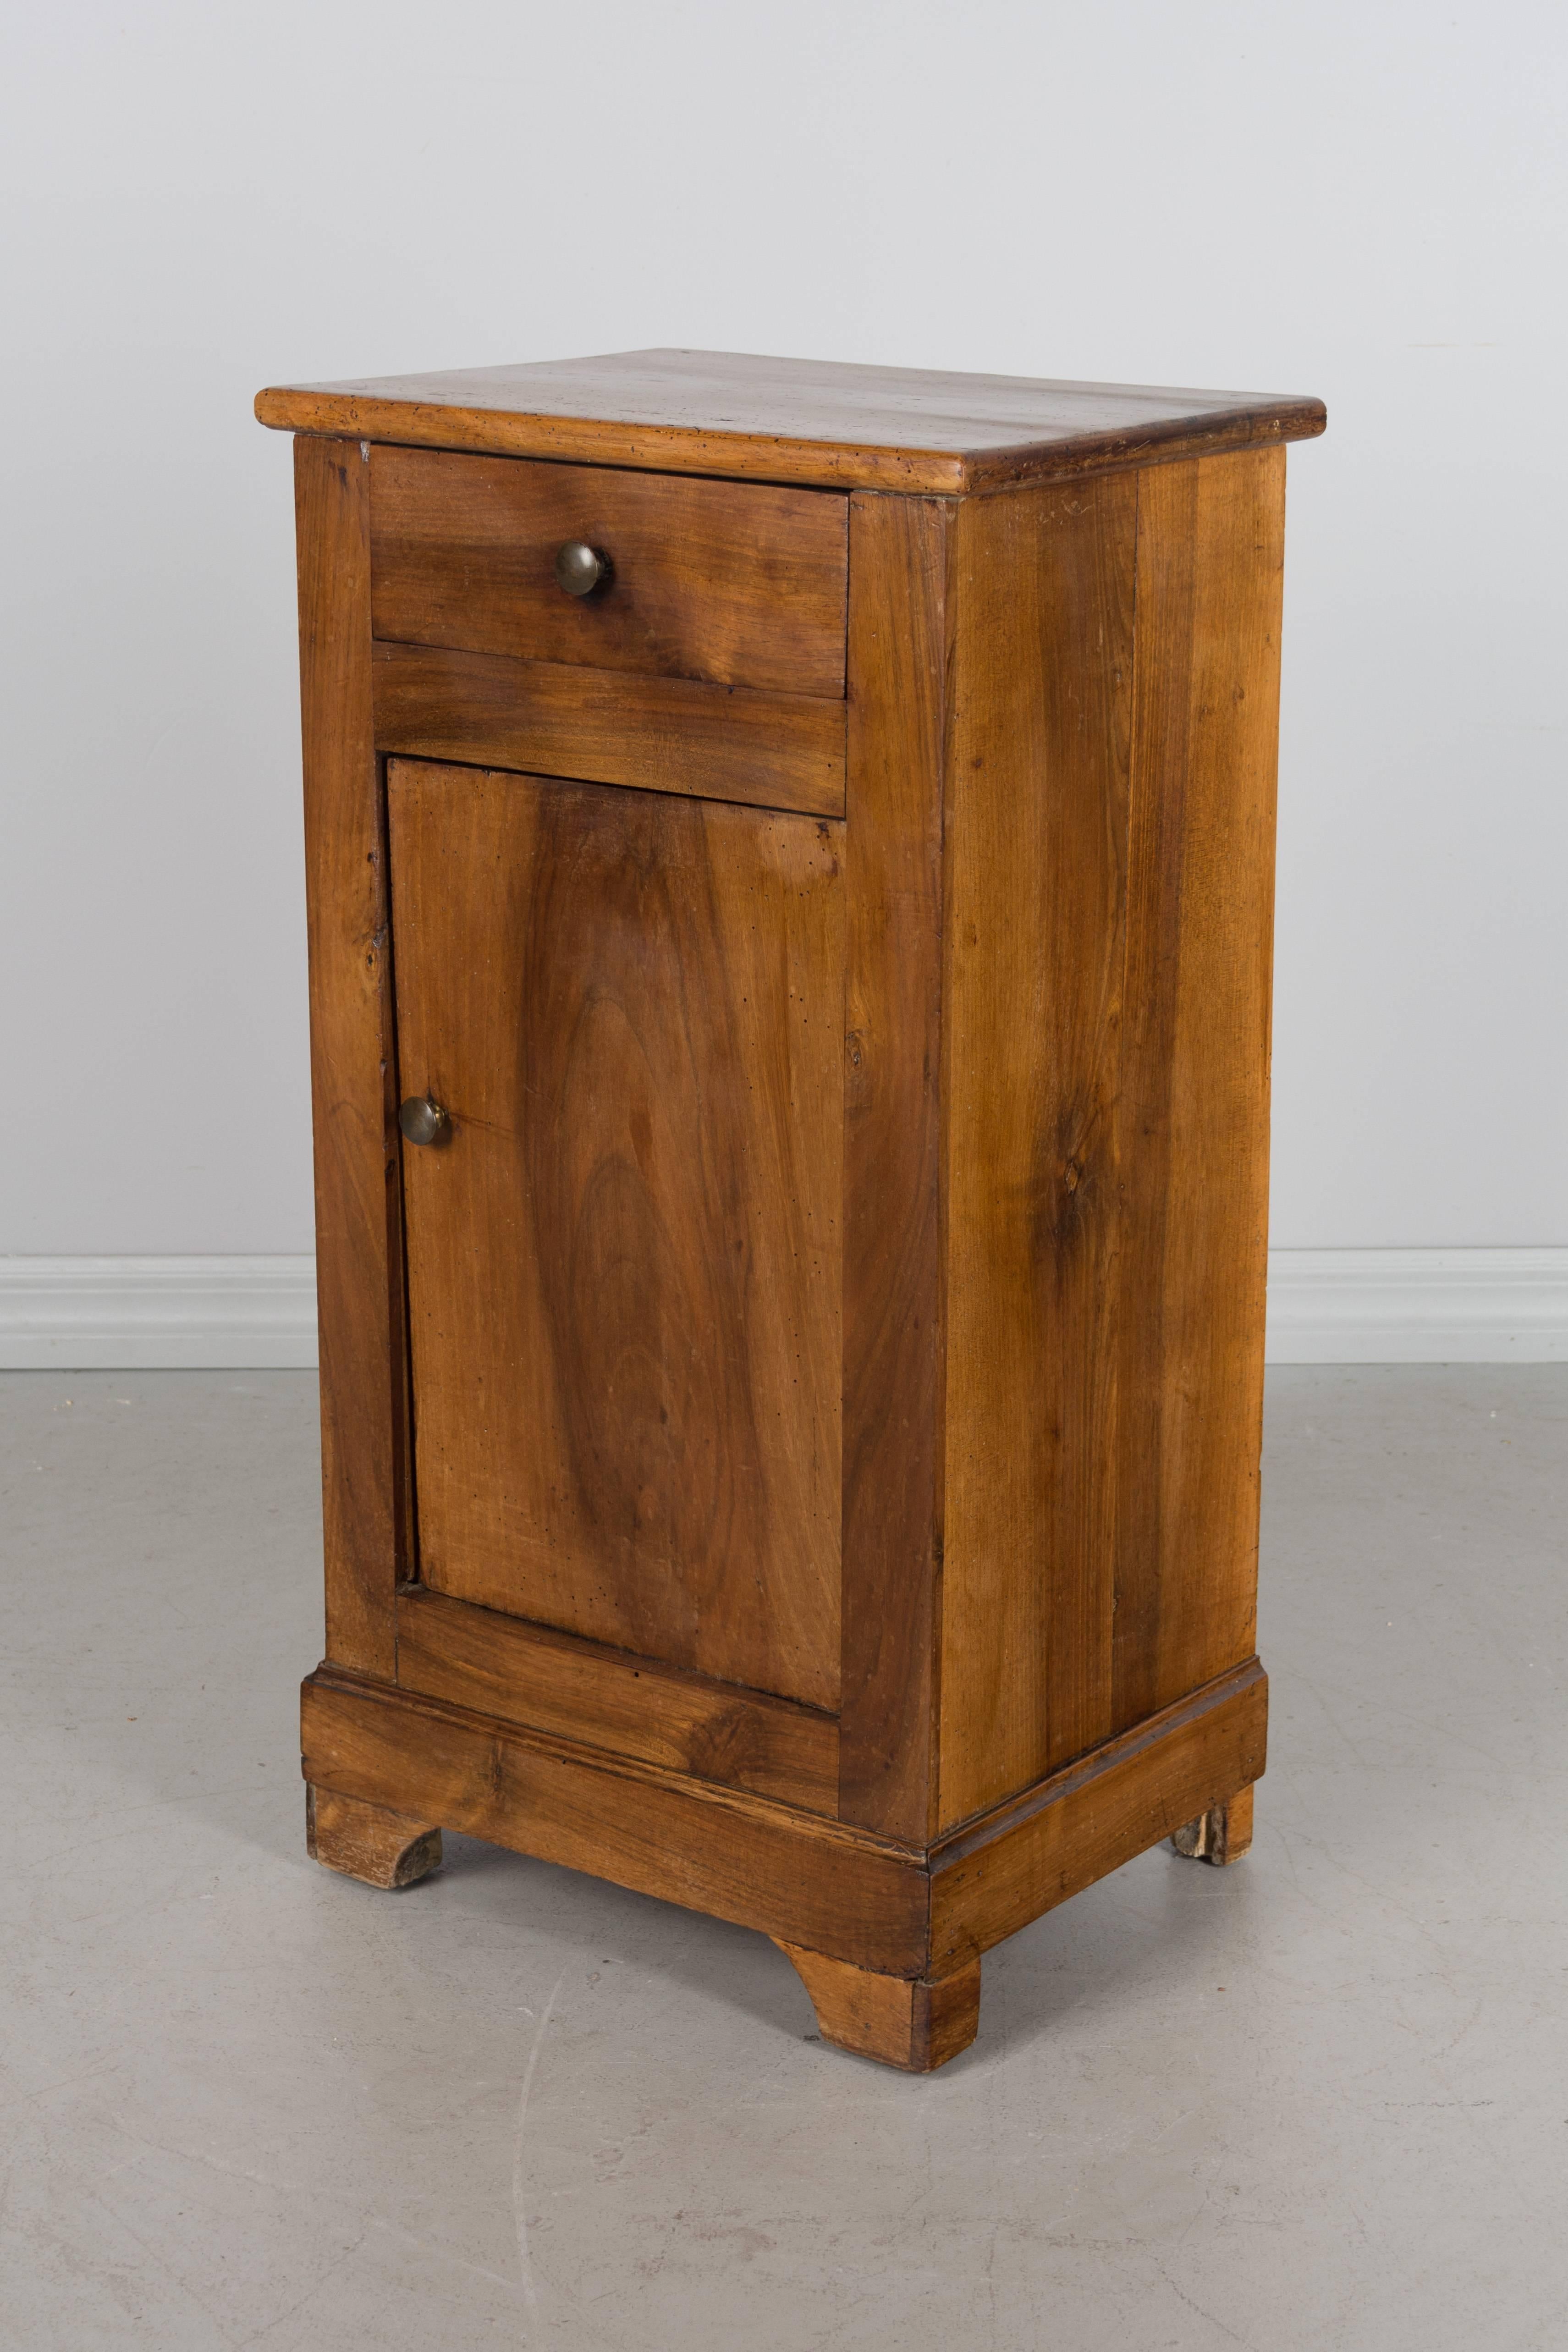 A French Louis Philippe style side table made of solid walnut with one drawer and a door opening to an interior with a single shelf.
More photos available upon request. We have a large selection of French antiques. Please visit our showroom in